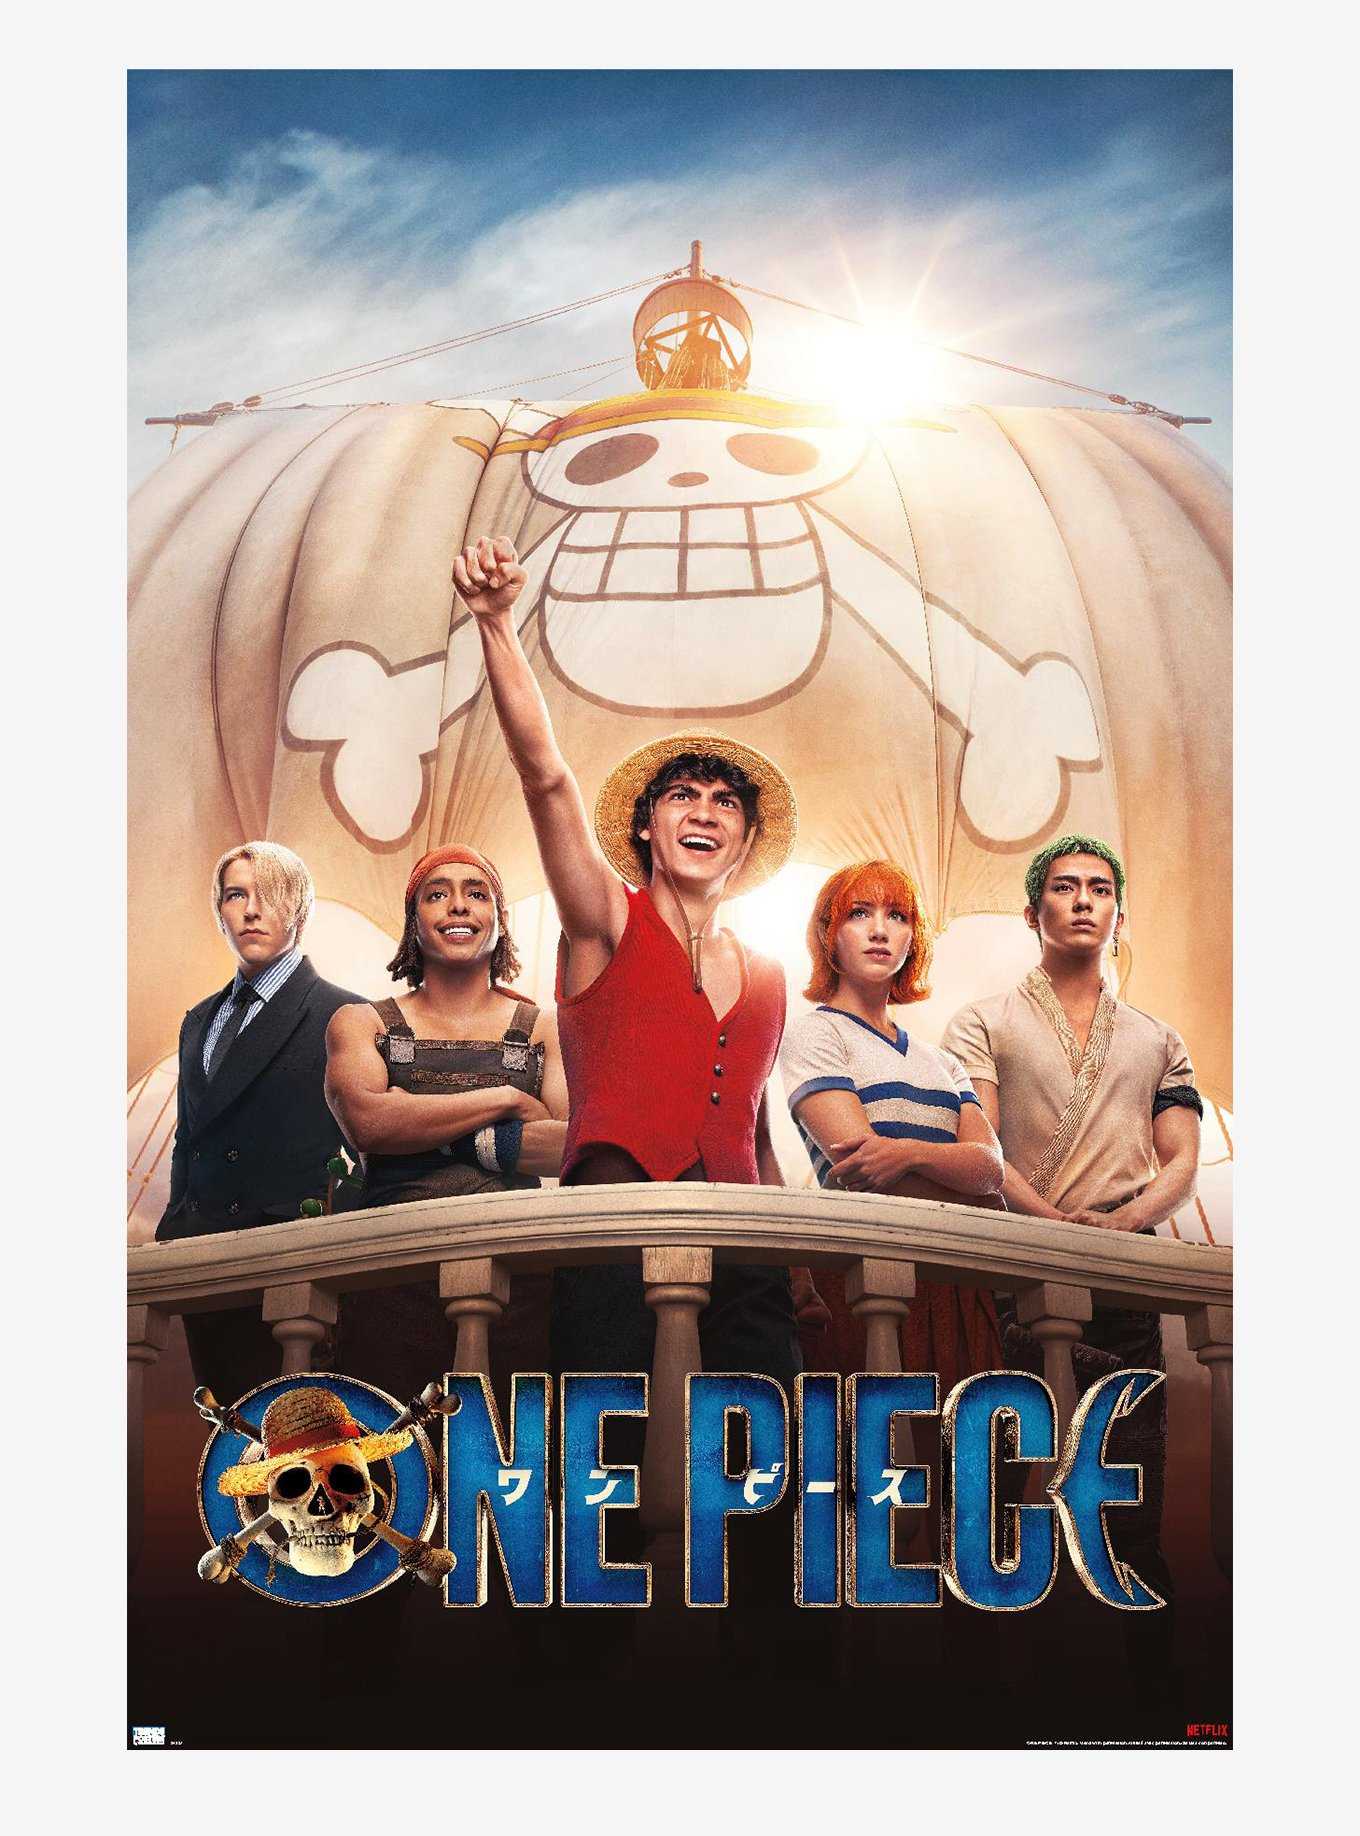 Once Piece Live Action Group Poster, , hi-res